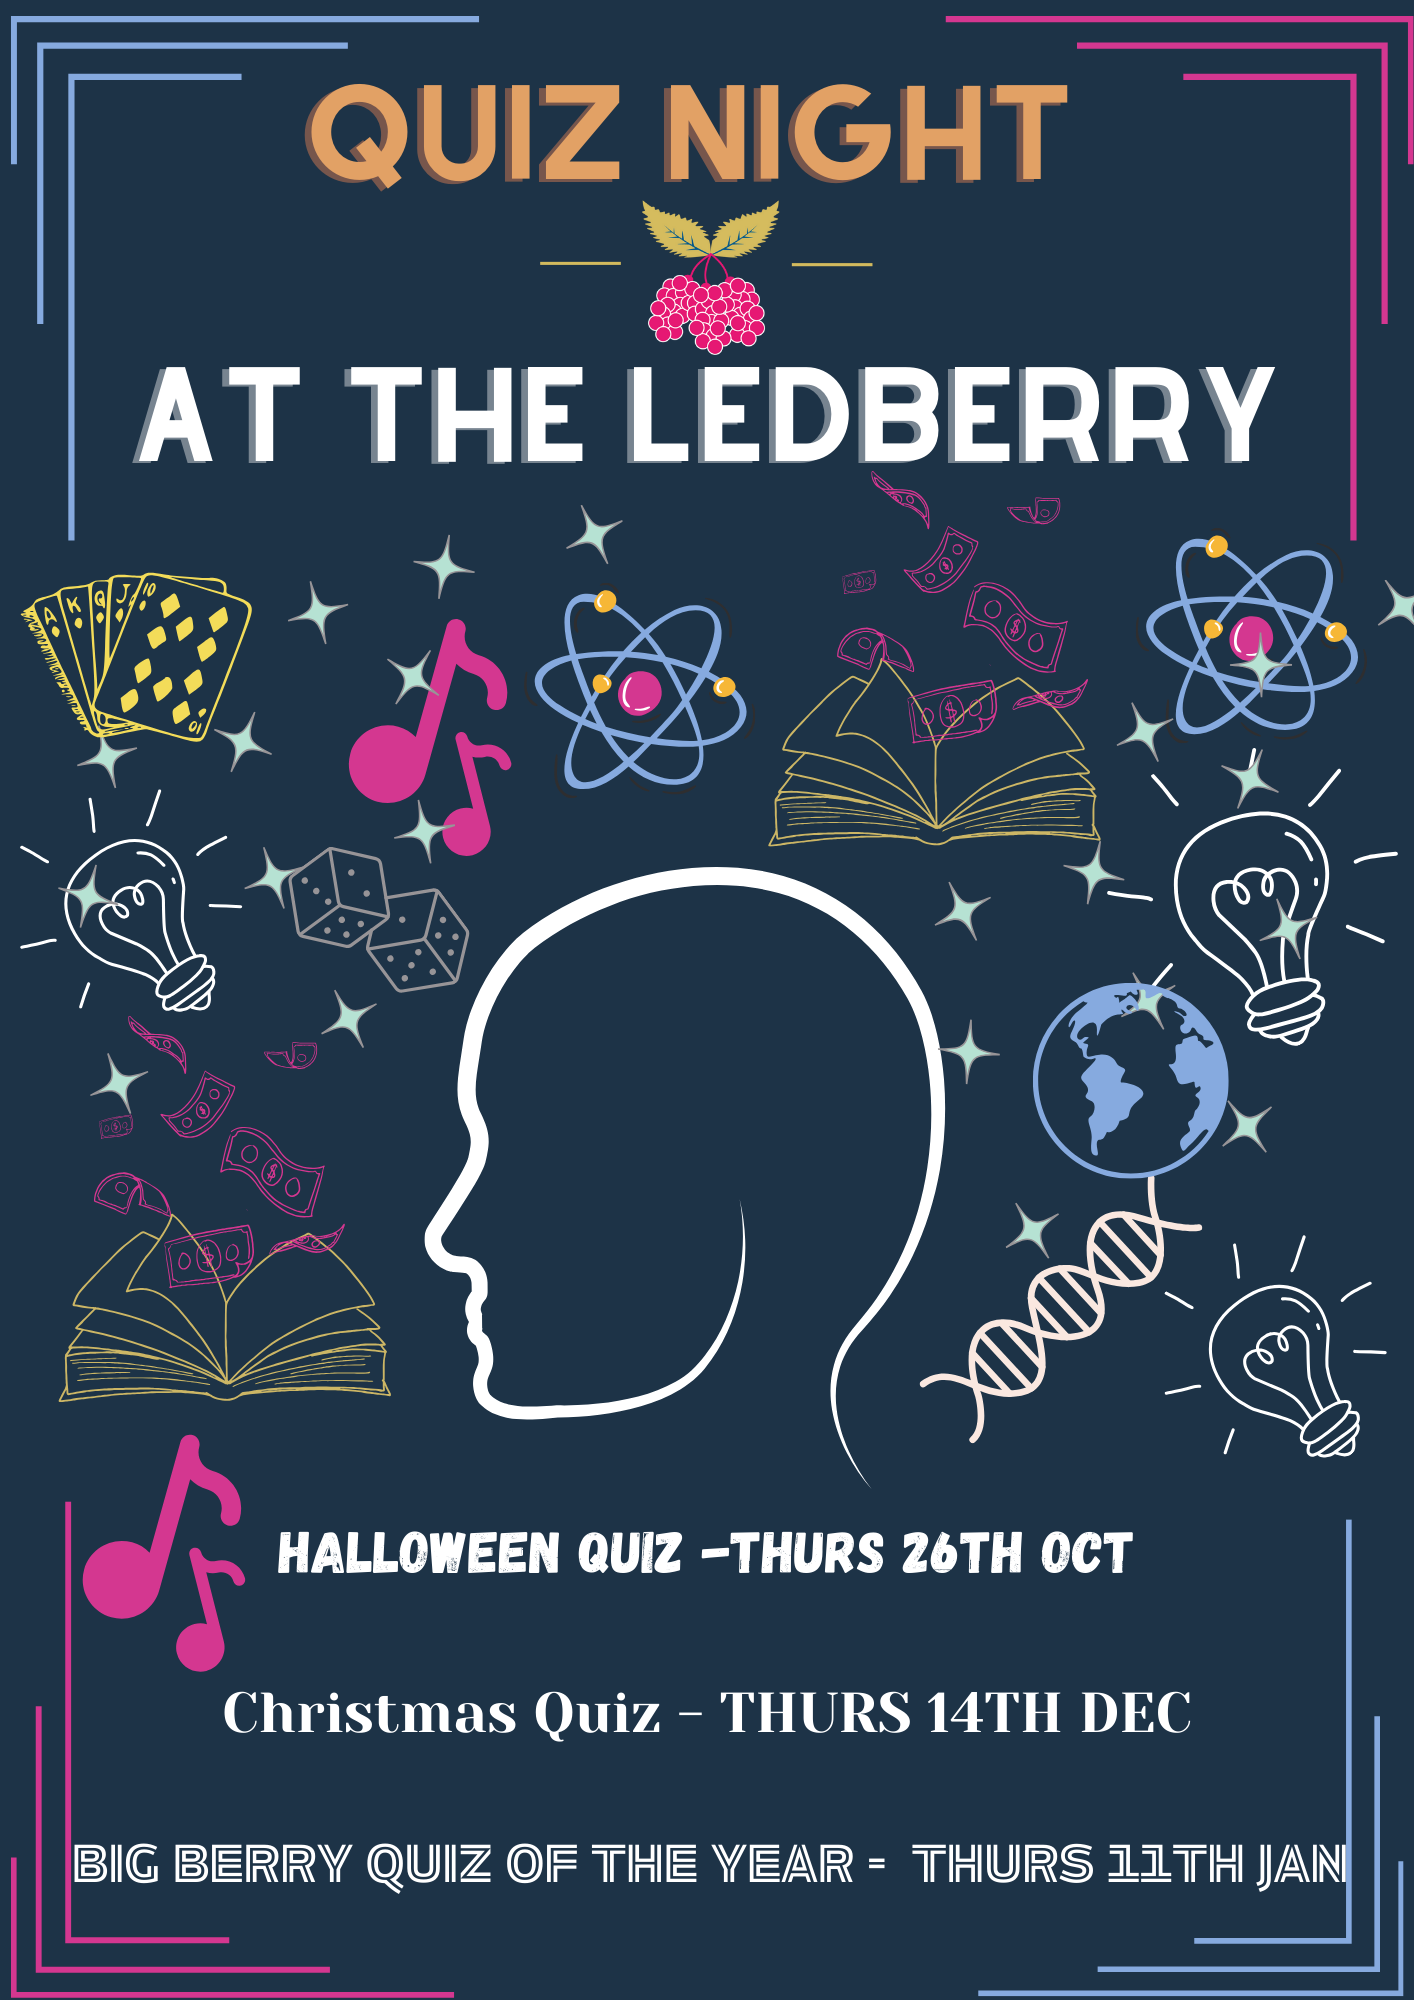 QUIZ NIGHTS AT THE LEDBERRY